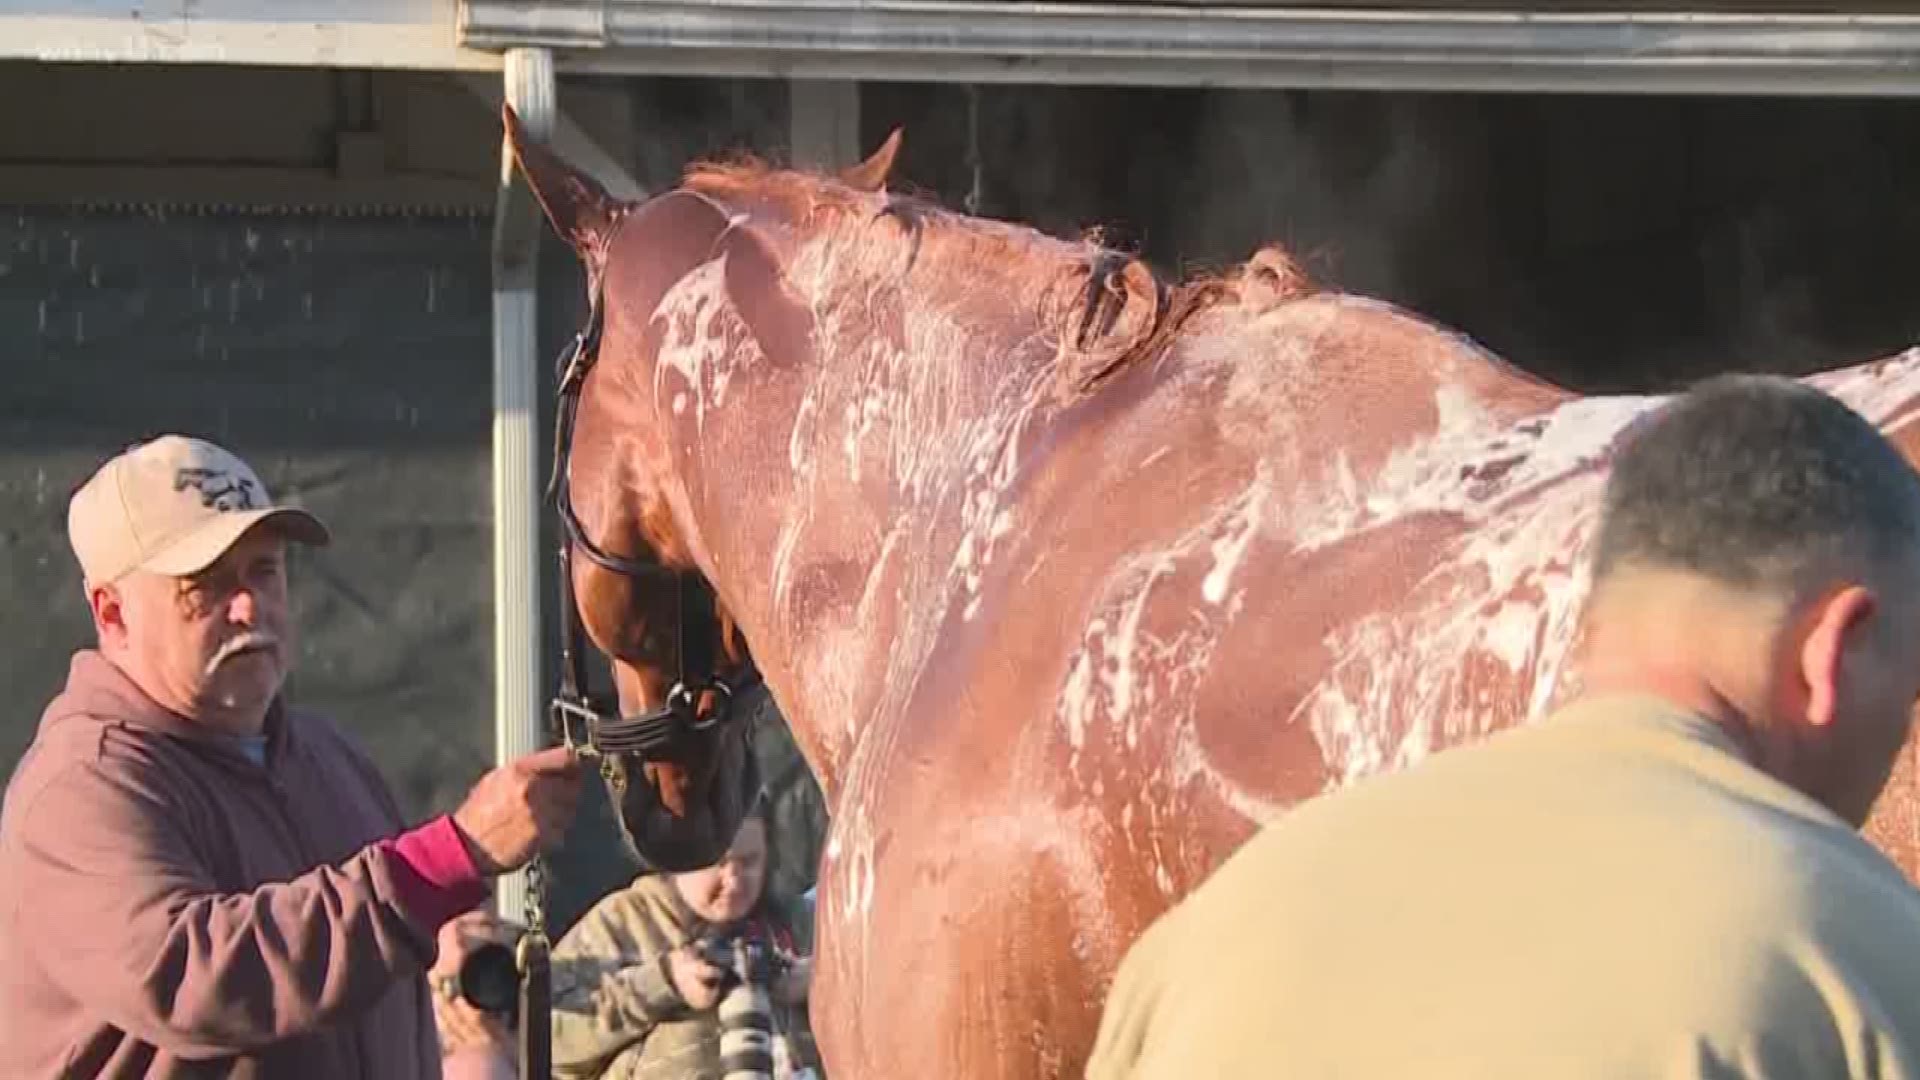 A news report says the horse had tested positive for the drug scopolamine after winning the Santa Anita Derby, one of the final prep races for the Kentucky Derby.